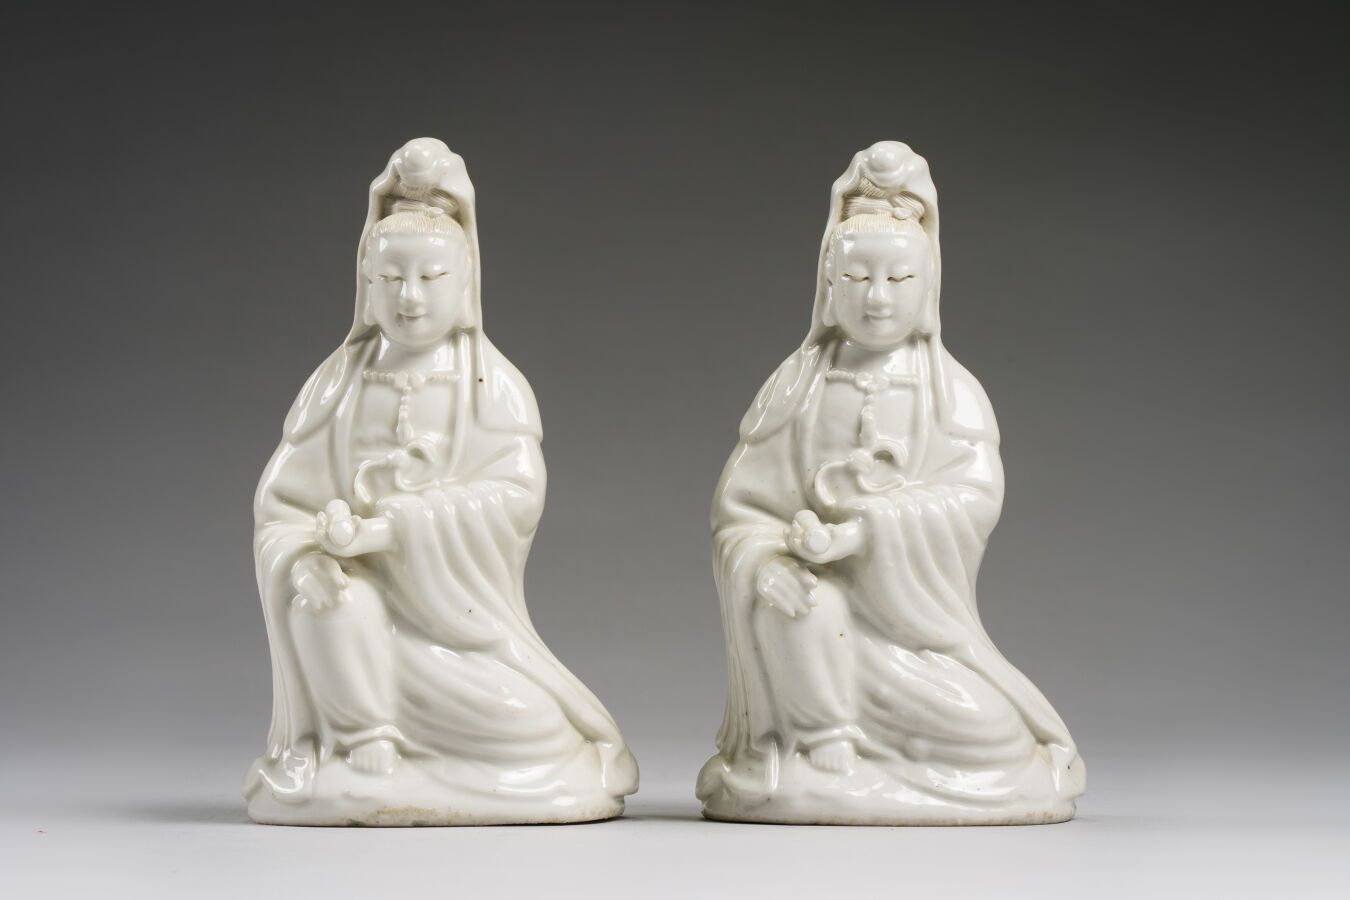 Null CHINA
Two statuettes of guanyin in white porcelain of China, represented si&hellip;